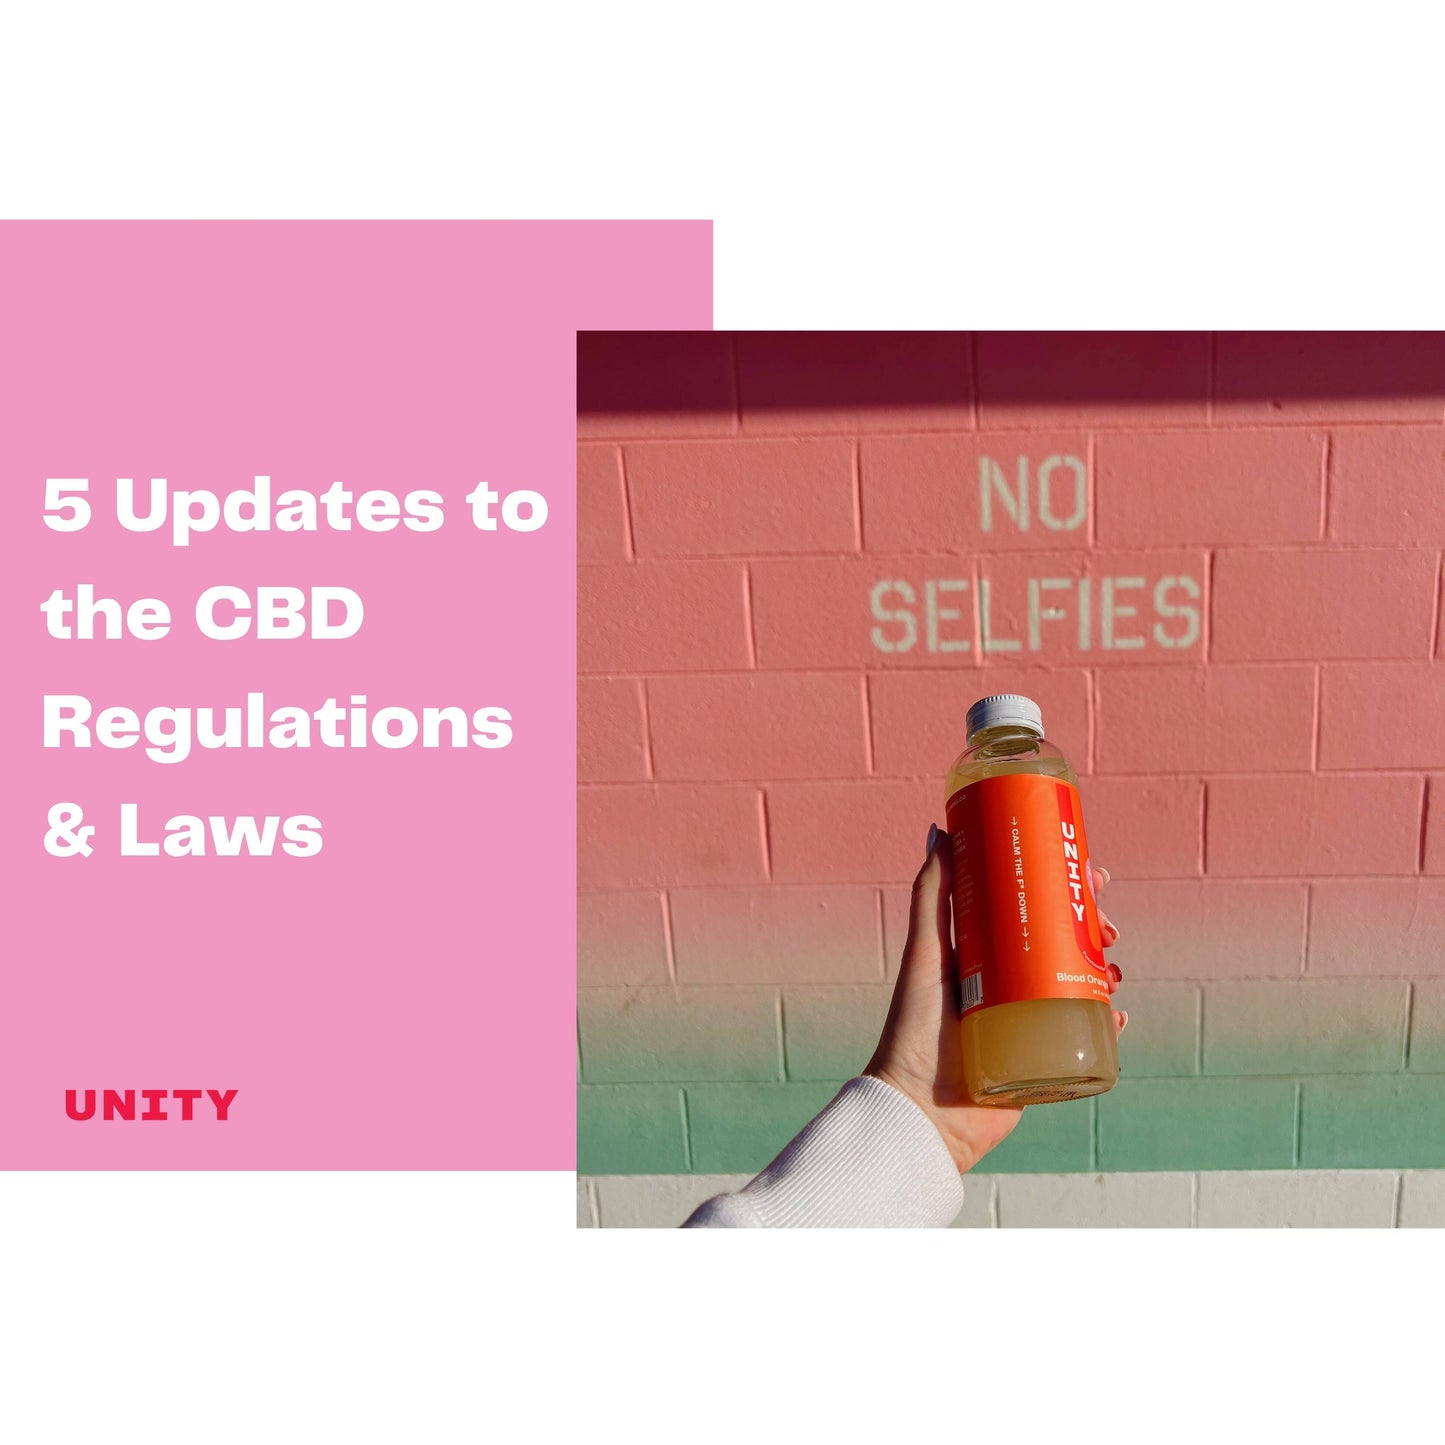 5 Updates to the CBD Regulations and Laws